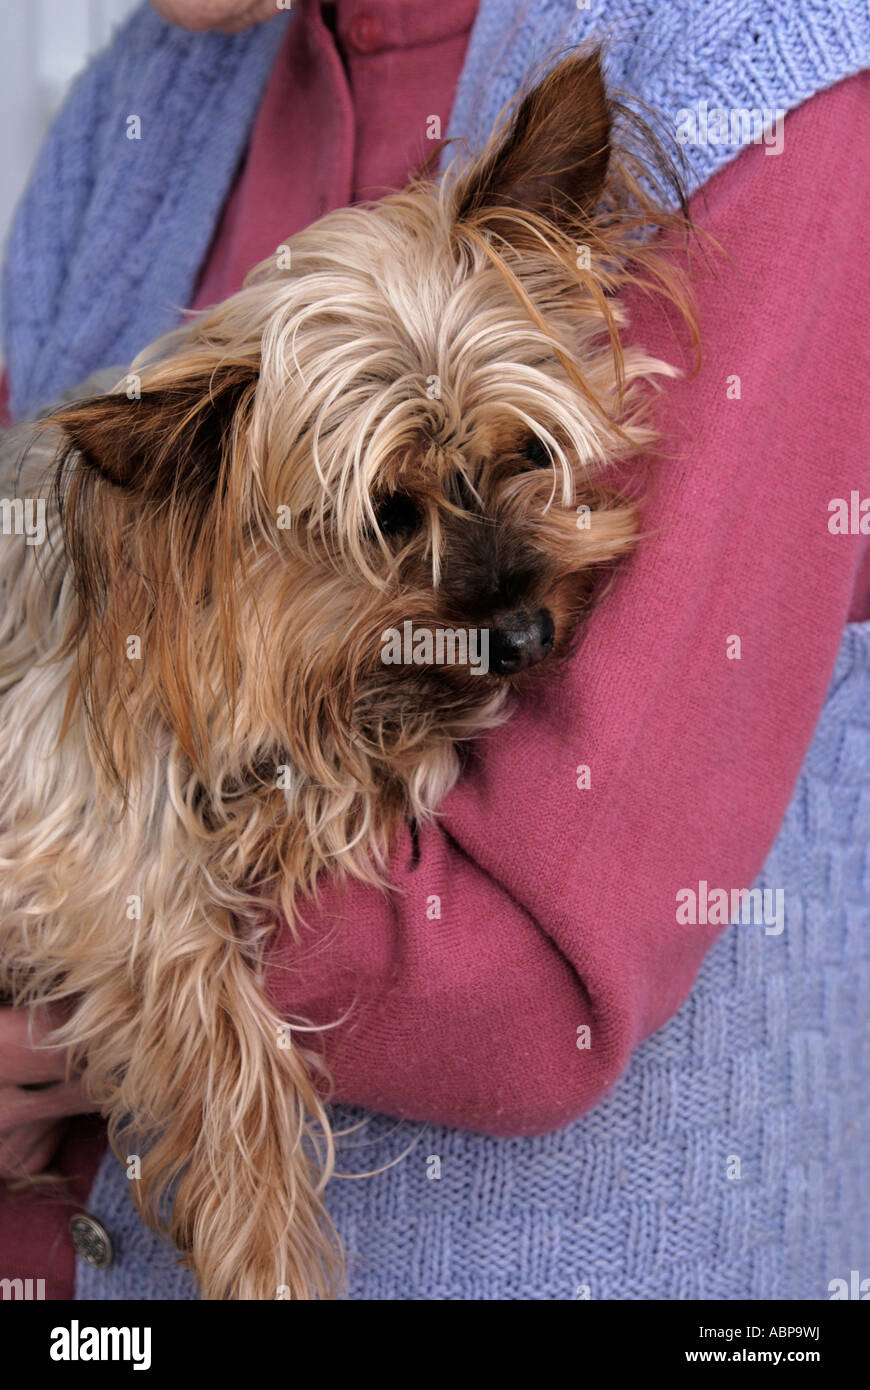 cute yorkshire terrier dog having a cuddle and fuss Stock Photo